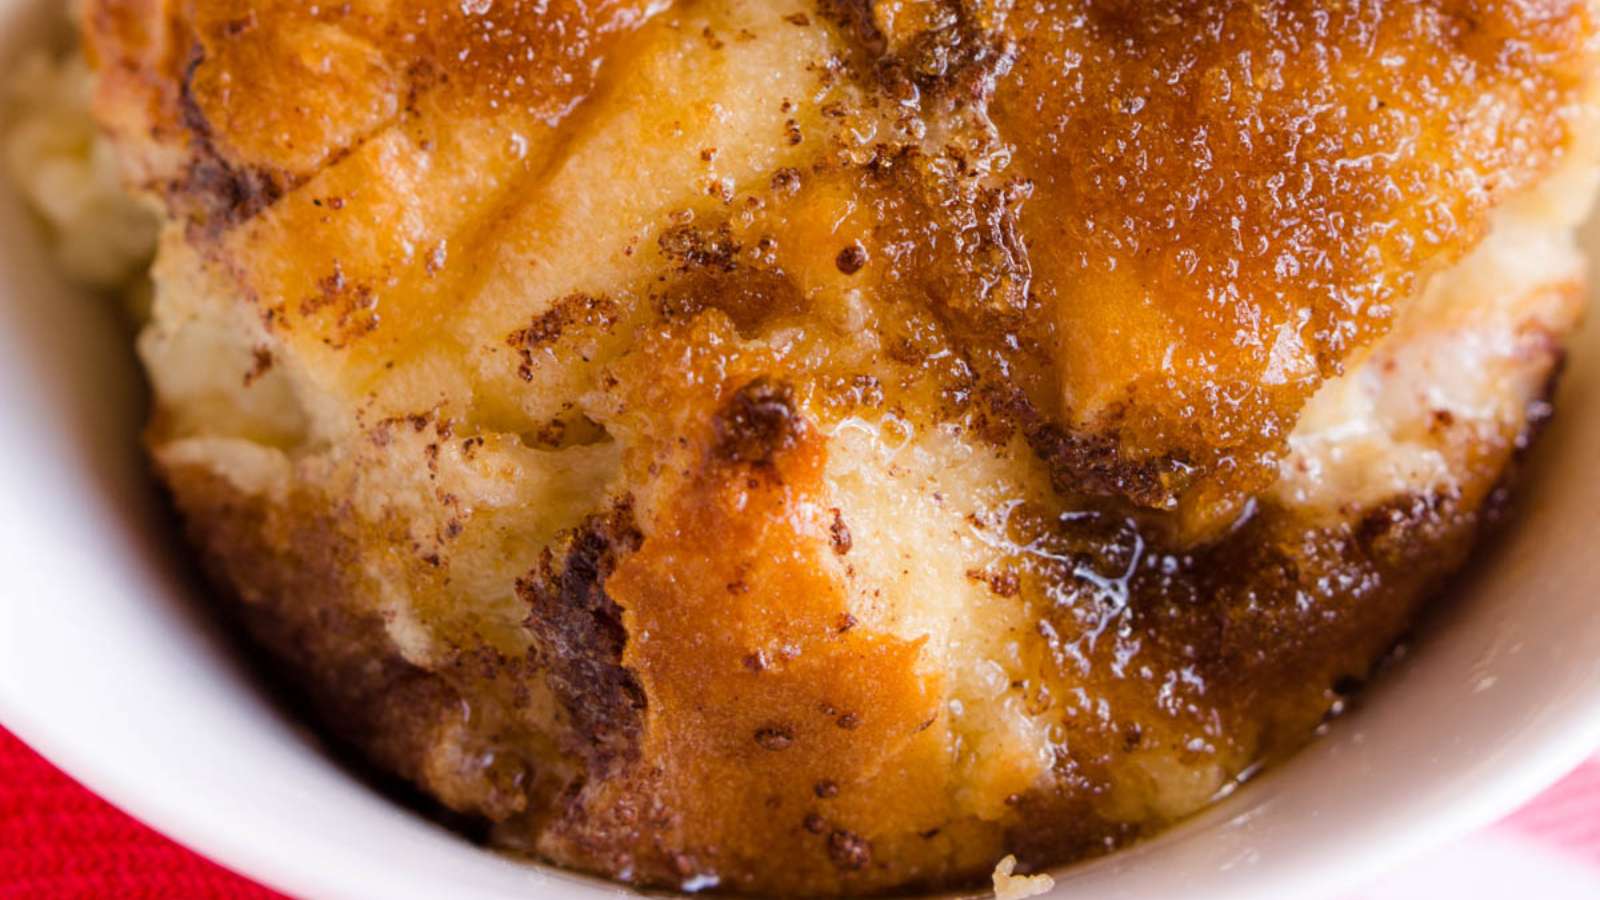 A close up of a bread pudding in a white bowl.